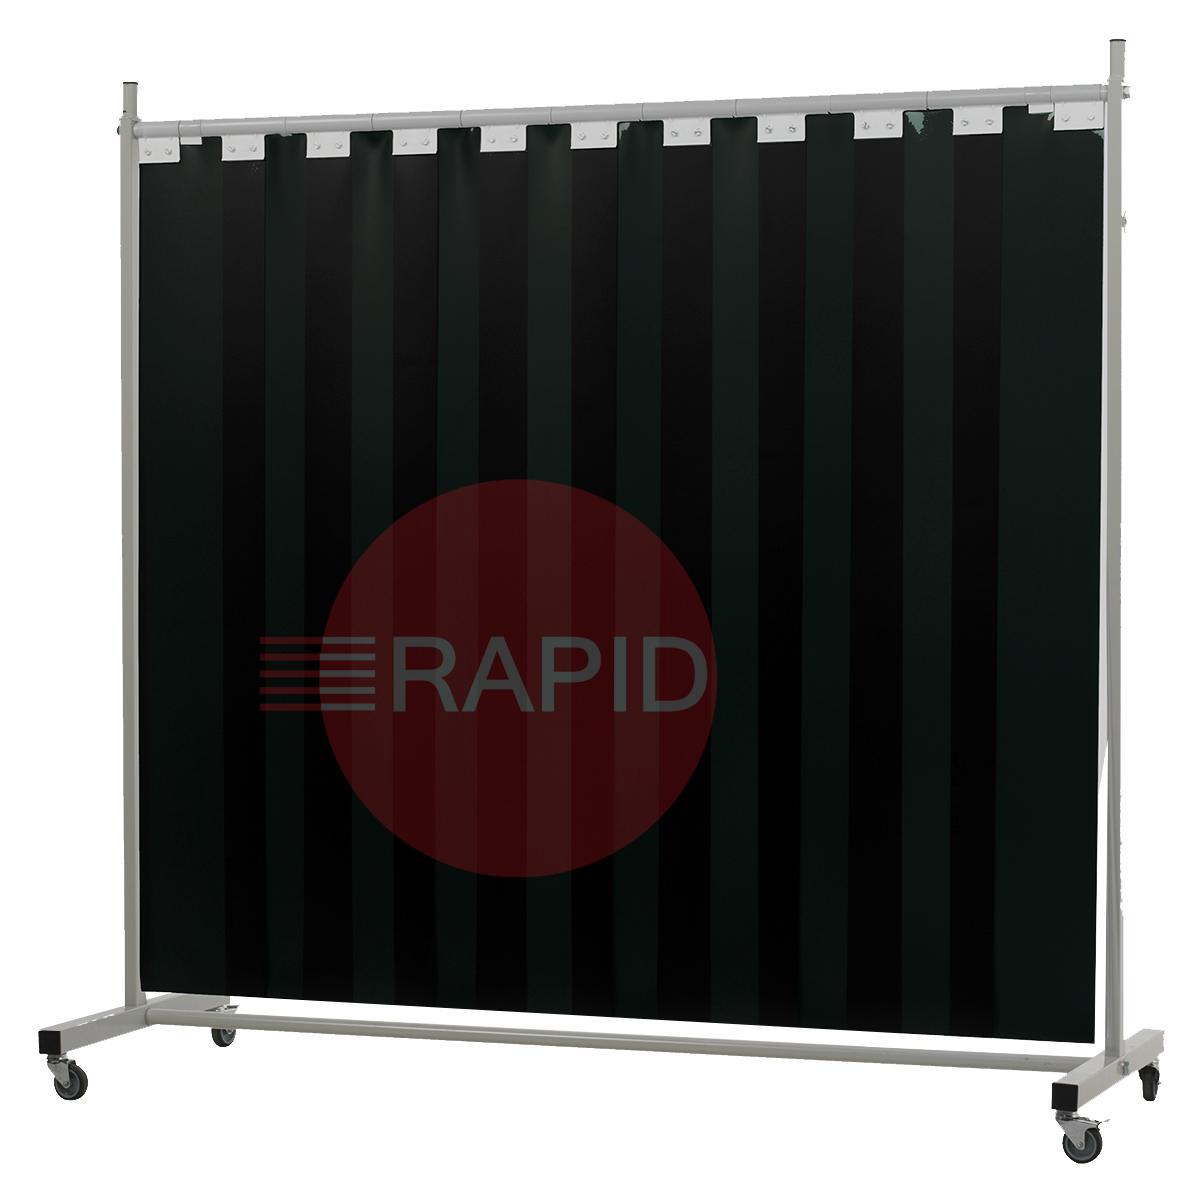 36.32.29  CEPRO Robusto Single Welding Screen with Green-9 Strips - 2.2m Wide x 2.1m High, Approved EN 25980